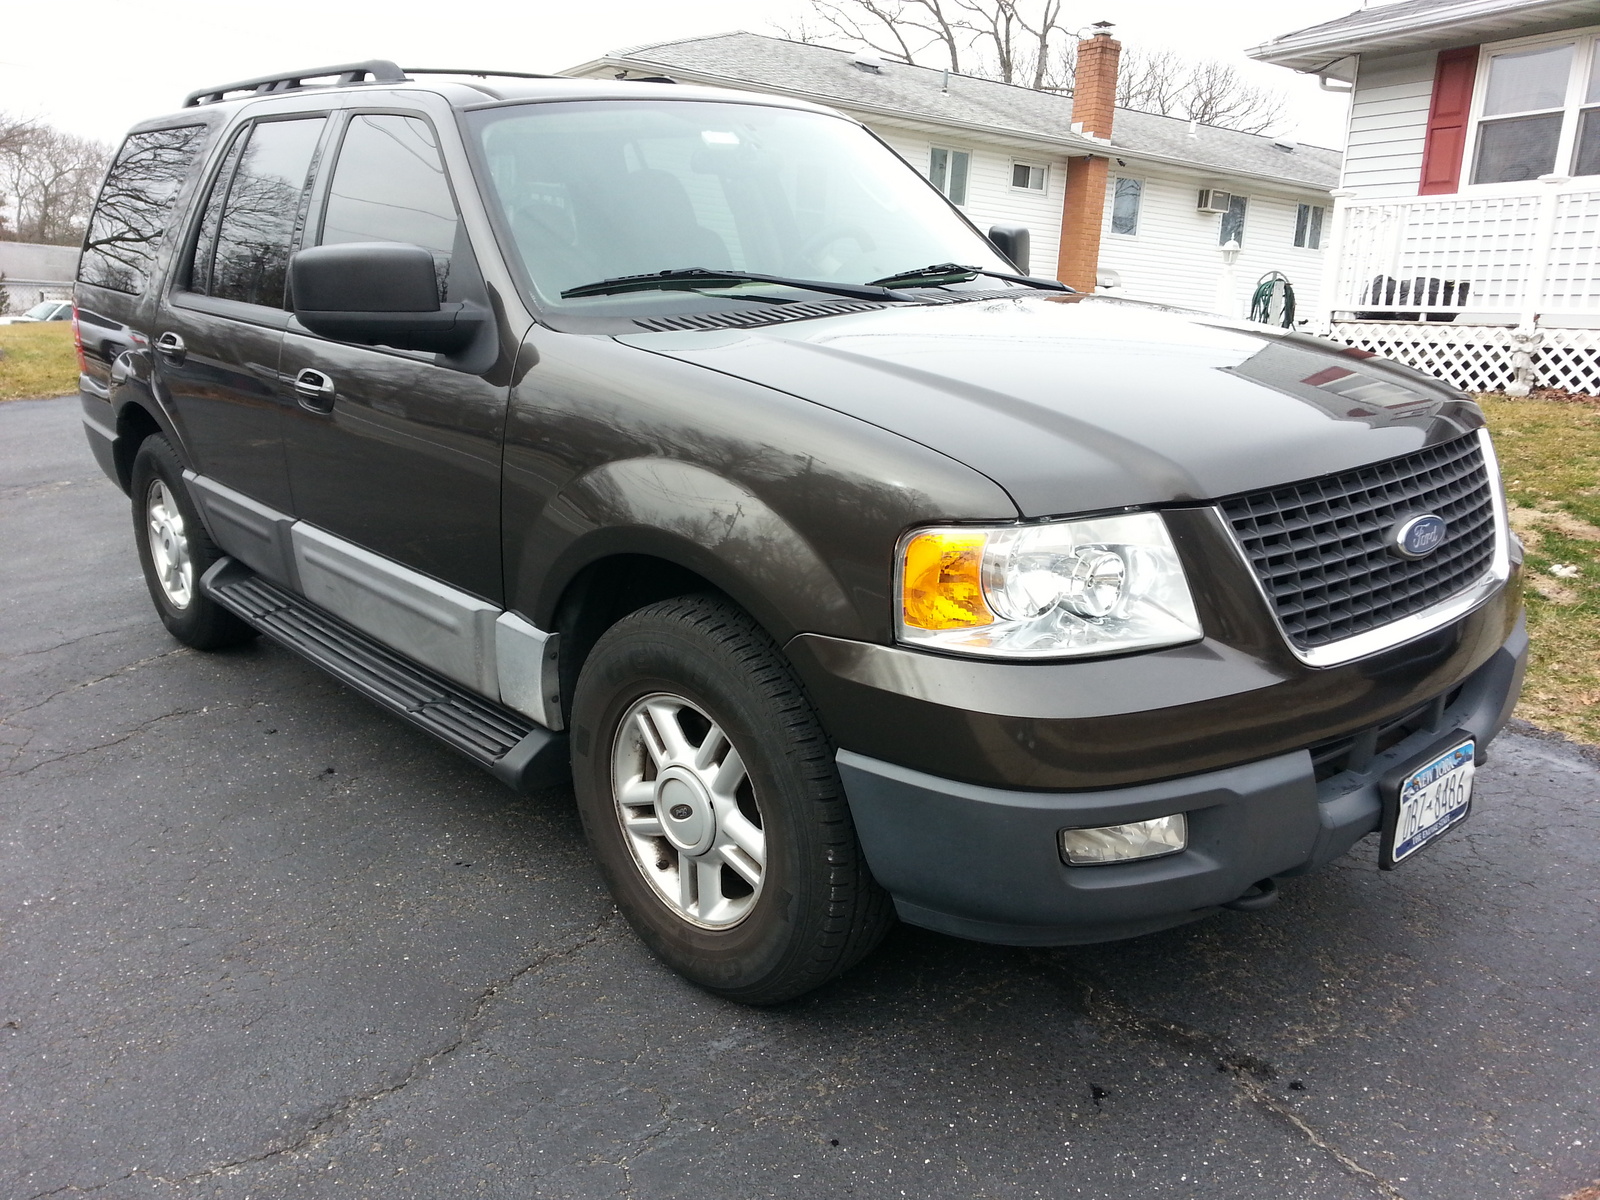 2005 Ford expedition xlt reviews #1